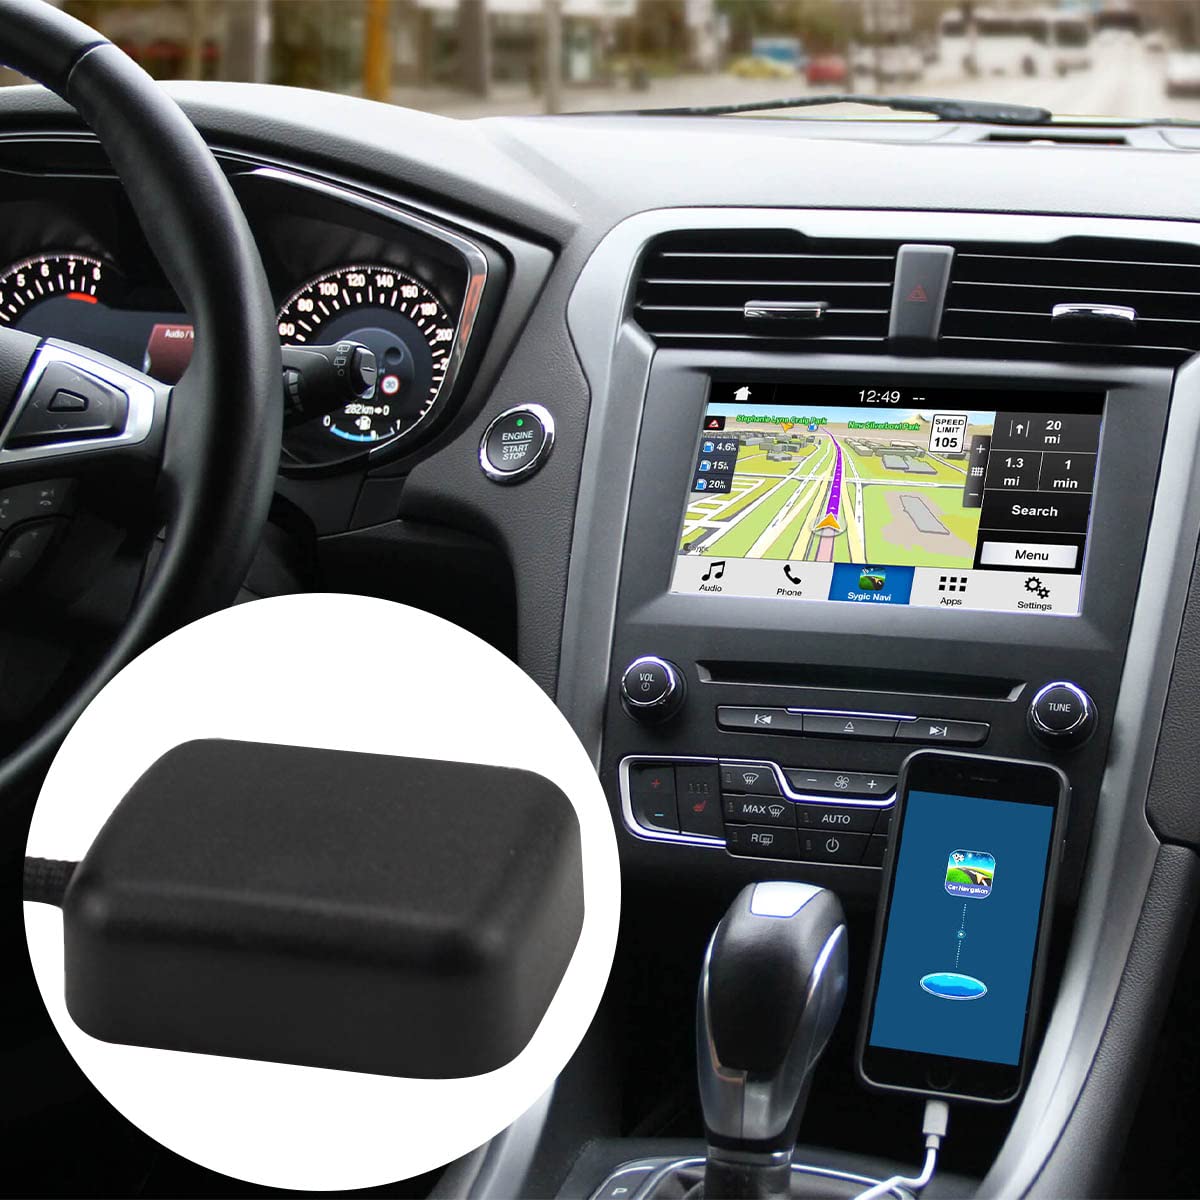 for Ford fakra c Right Angle Antenna,for Ford sync1/sync2 to sync 3 Upgraded GPS Navigation Antenna, Using car Acoustic Tape Silent and noiseless to give You a Different Global Positioning Antenna